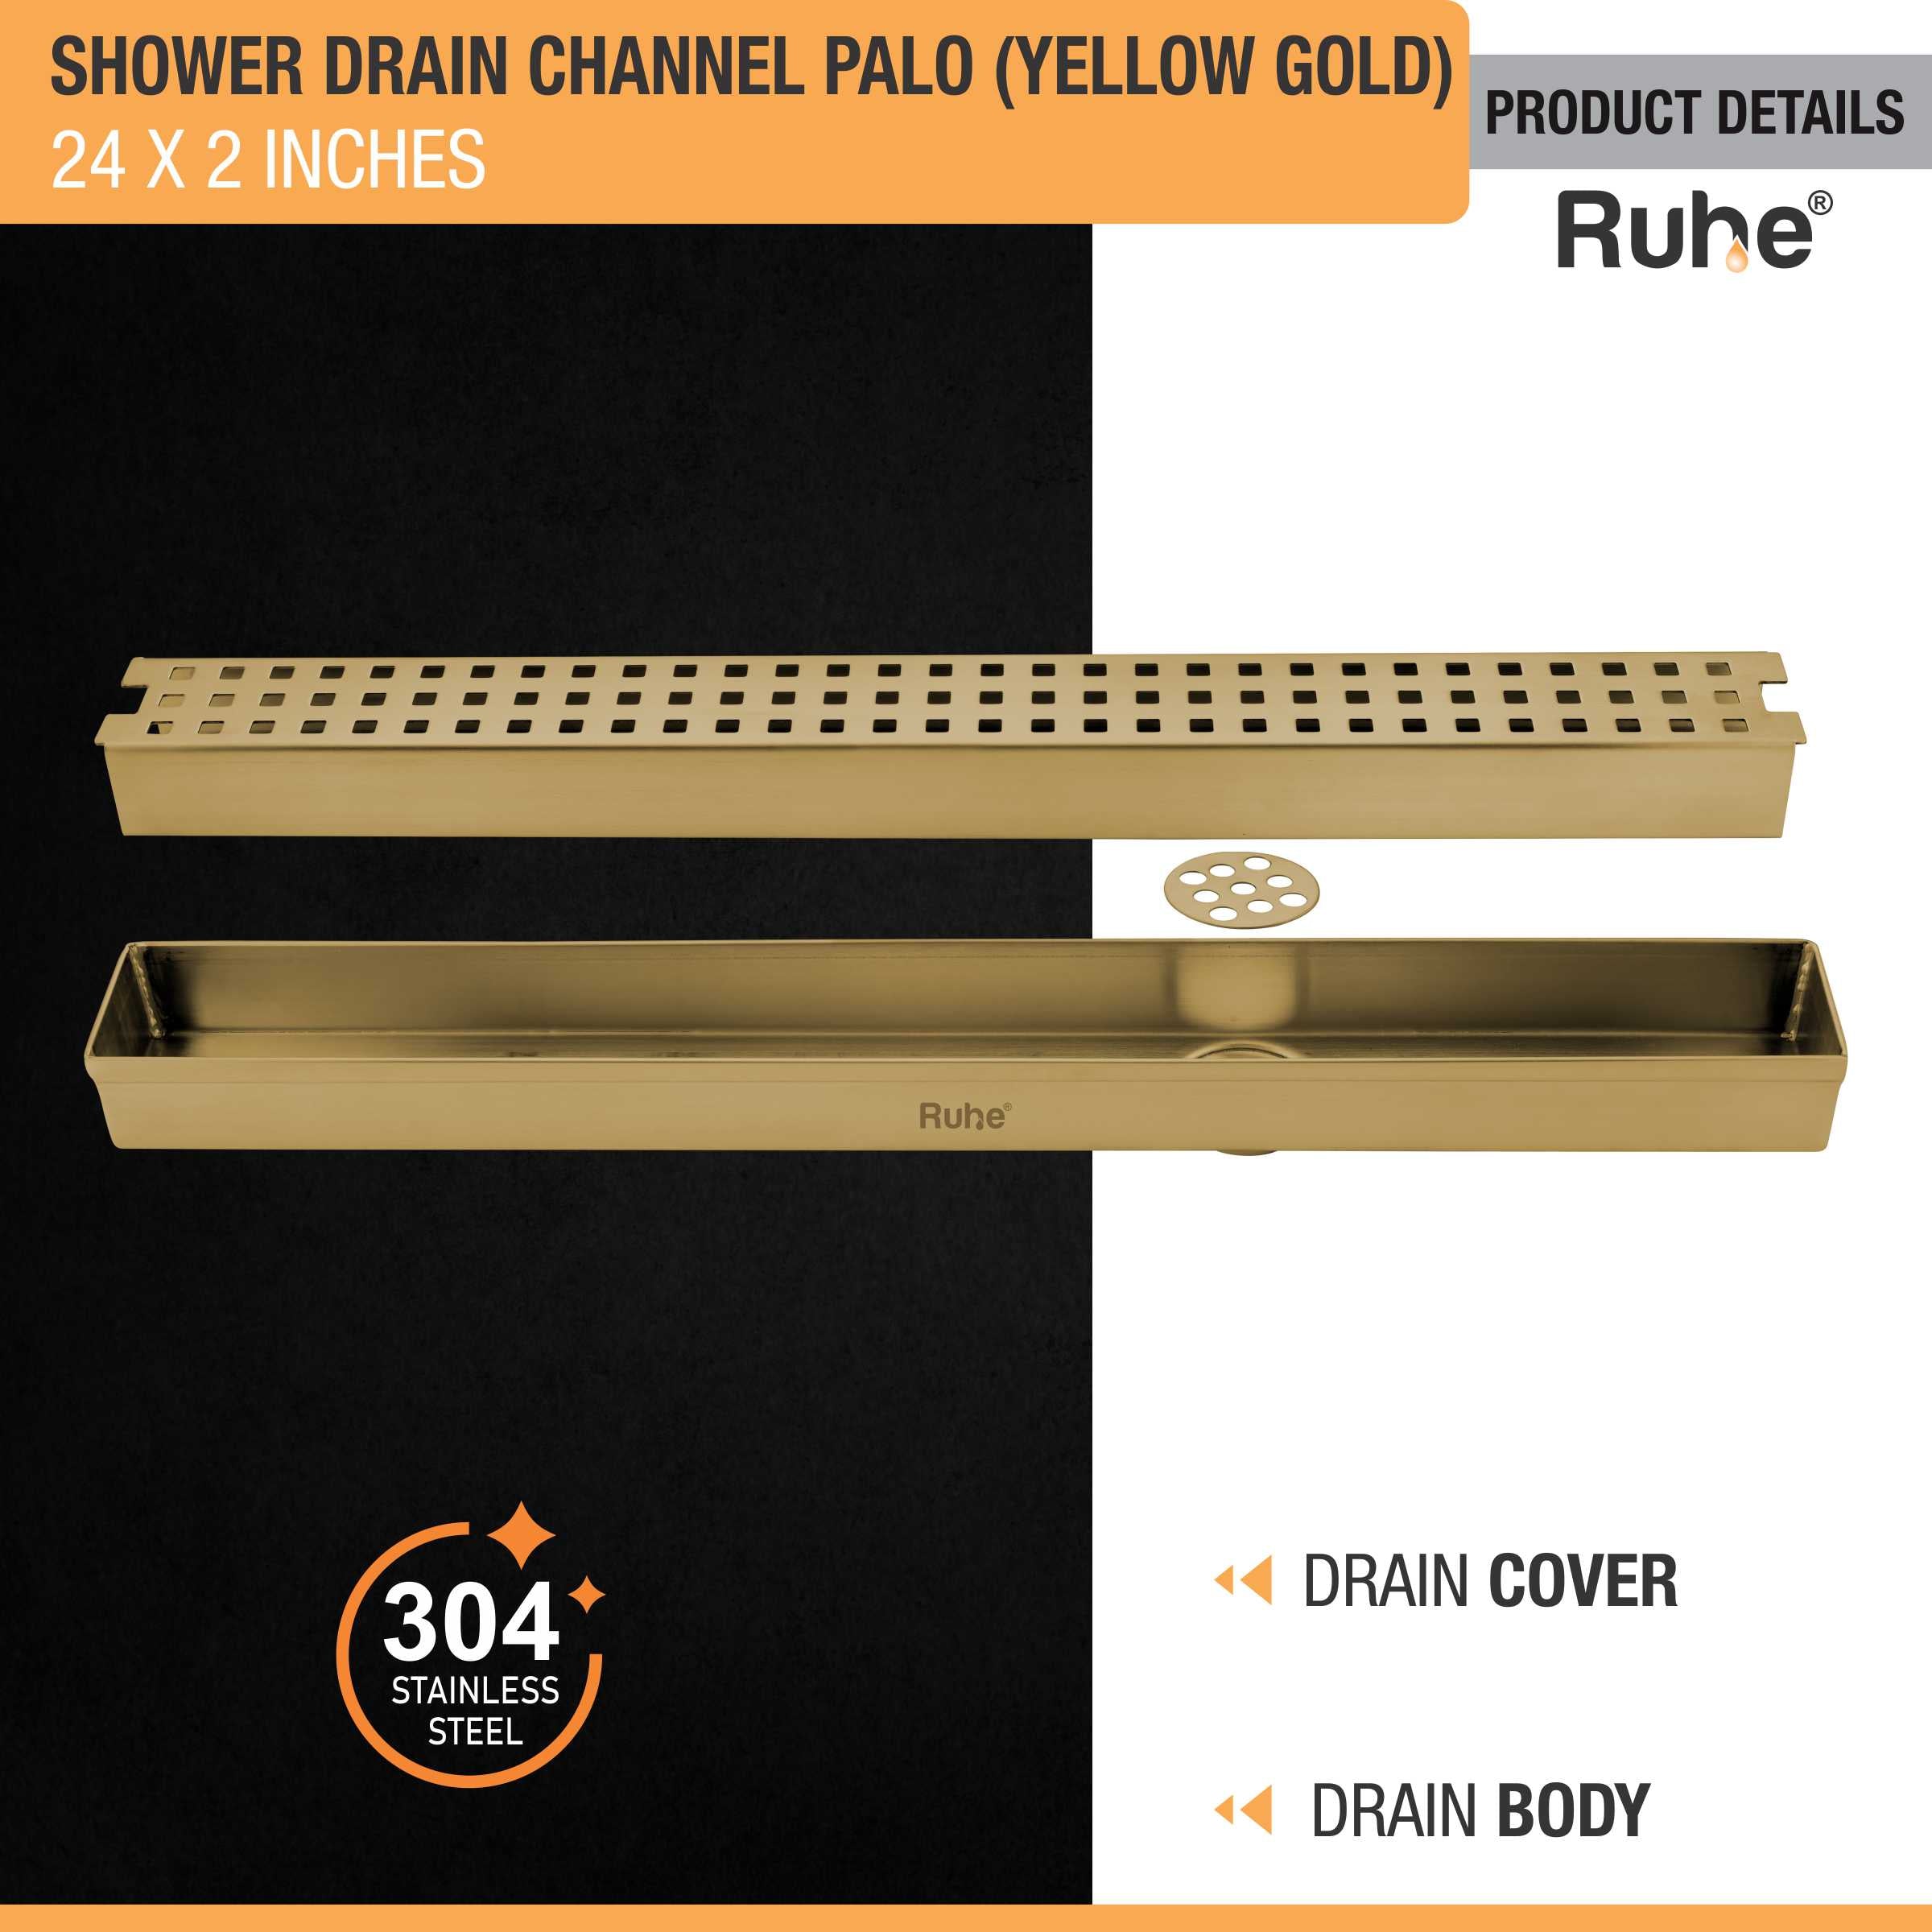 Palo Shower Drain Channel (24 x 2 Inches) YELLOW GOLD product details